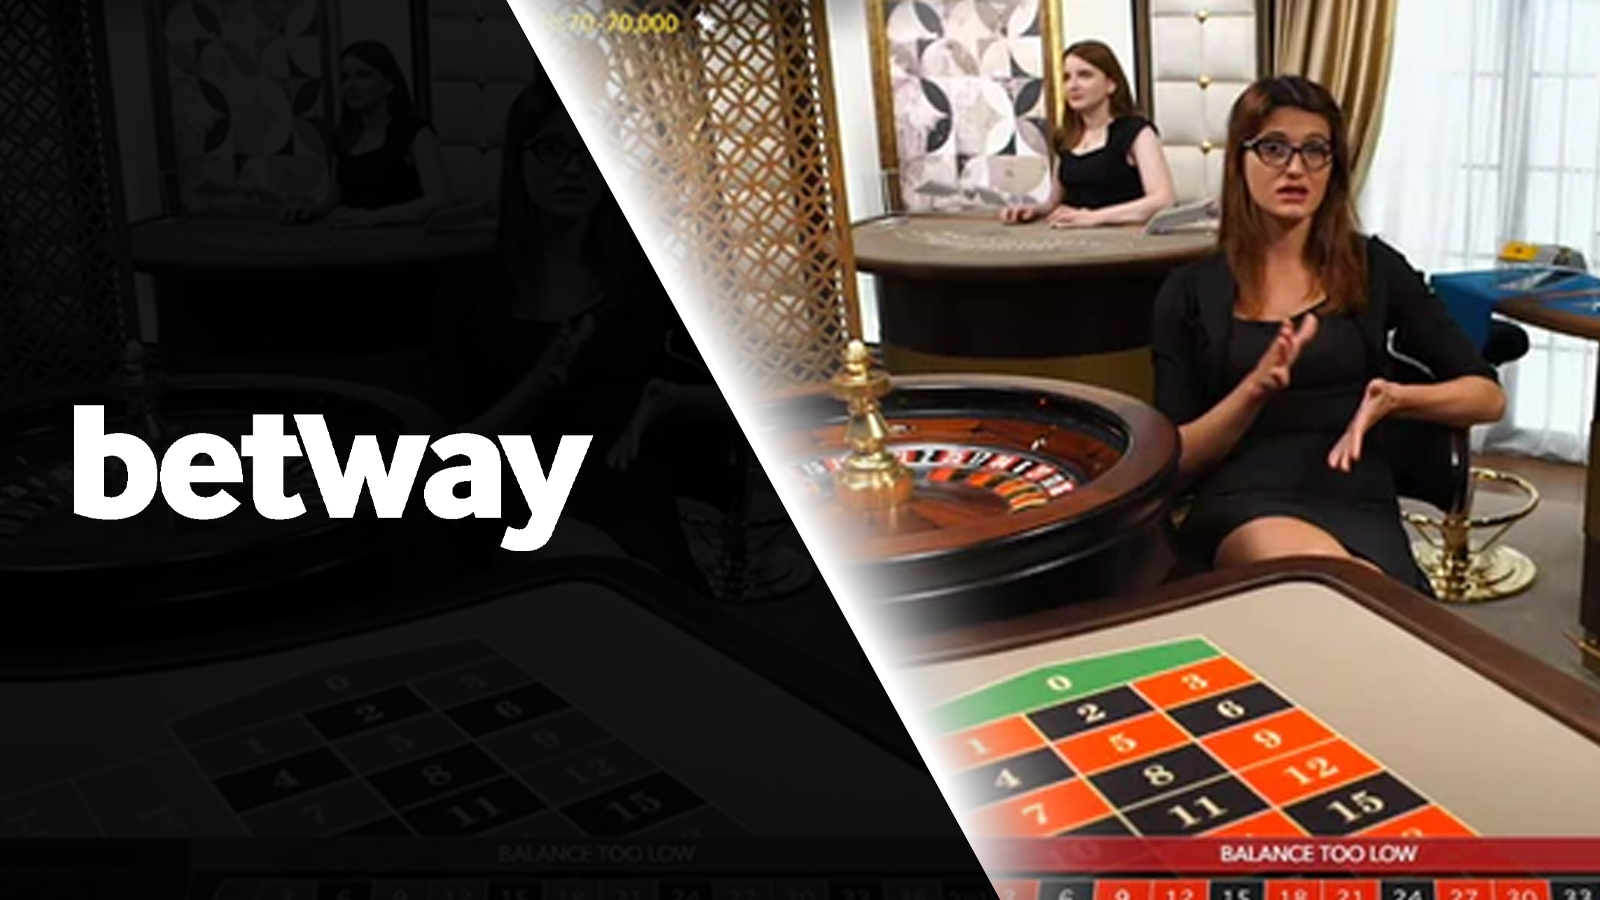 Play your favorite type of roulette at Betway casino.